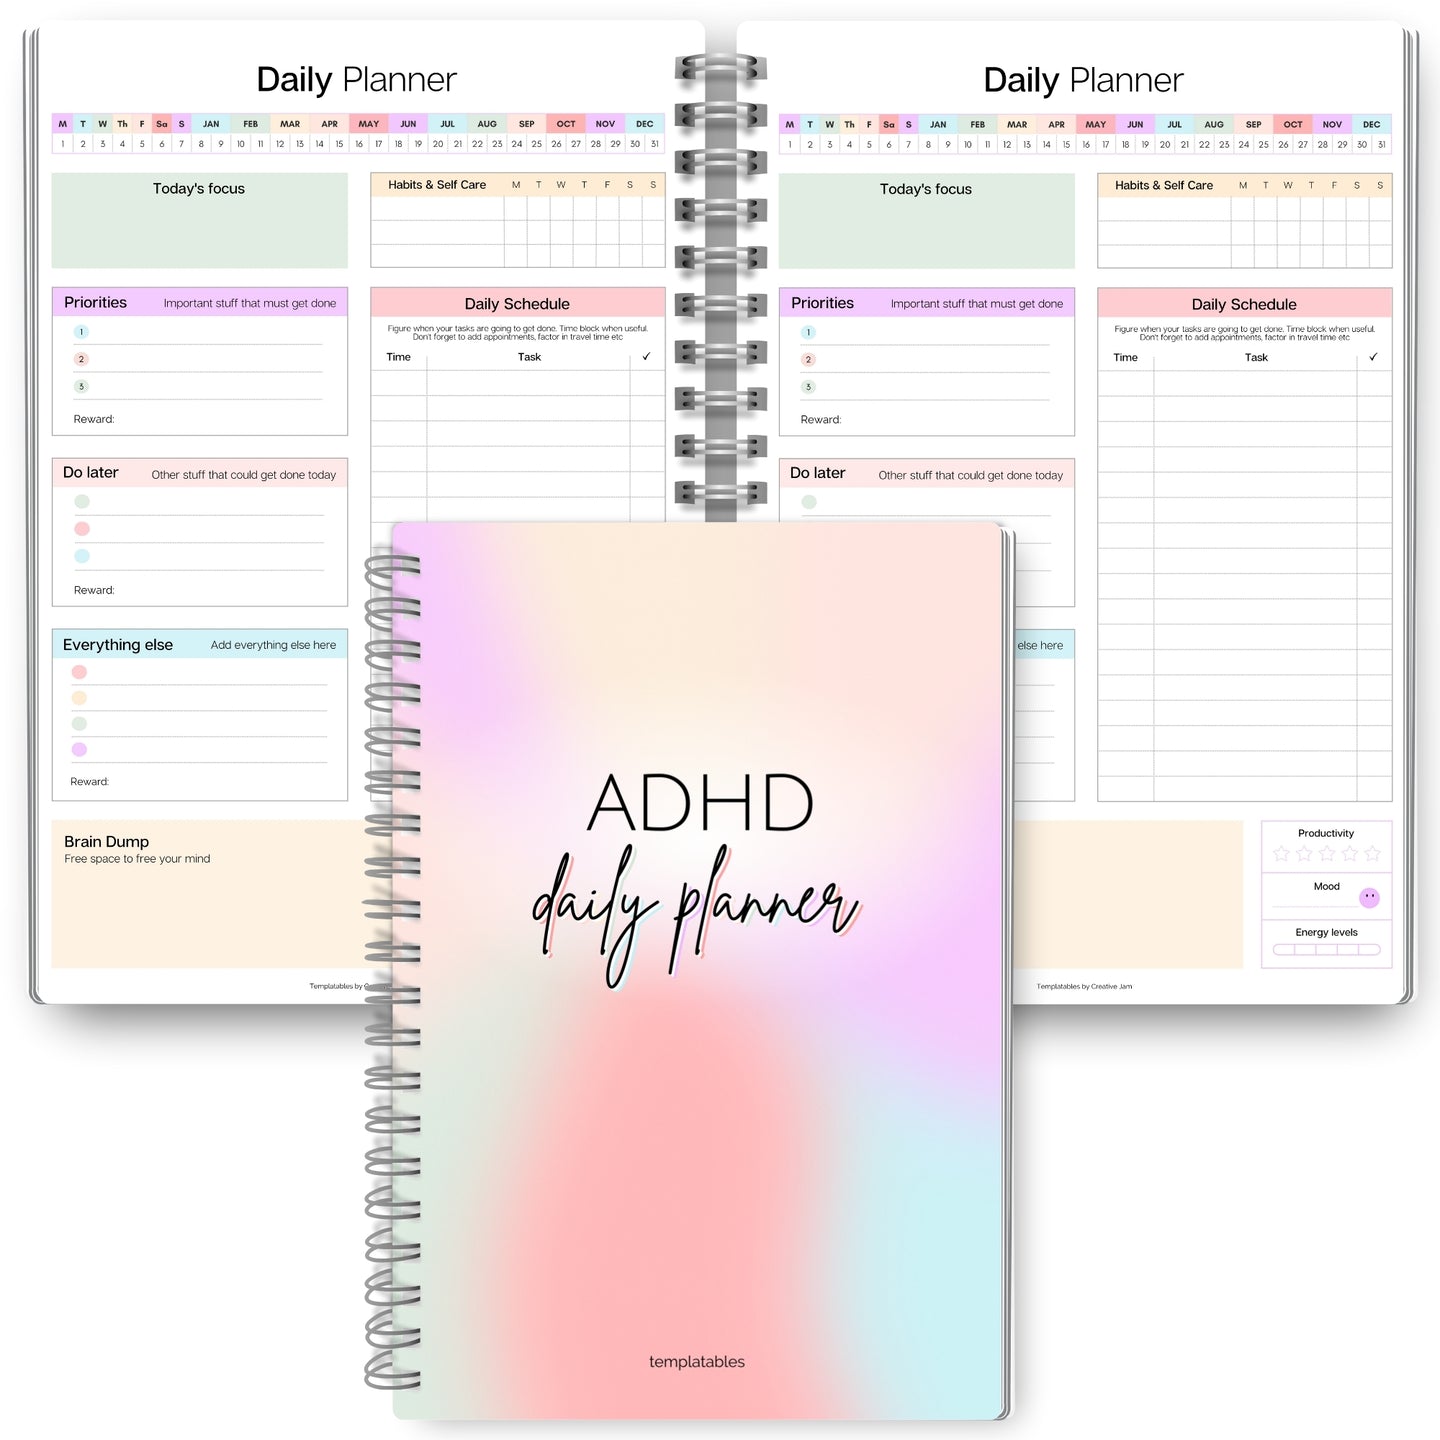 ADHD Daily Planner for Neurodivergent Adults - Productivity Daily Planner & Task Management to Stay Organized and Focused | A5 Pastel Rainbow